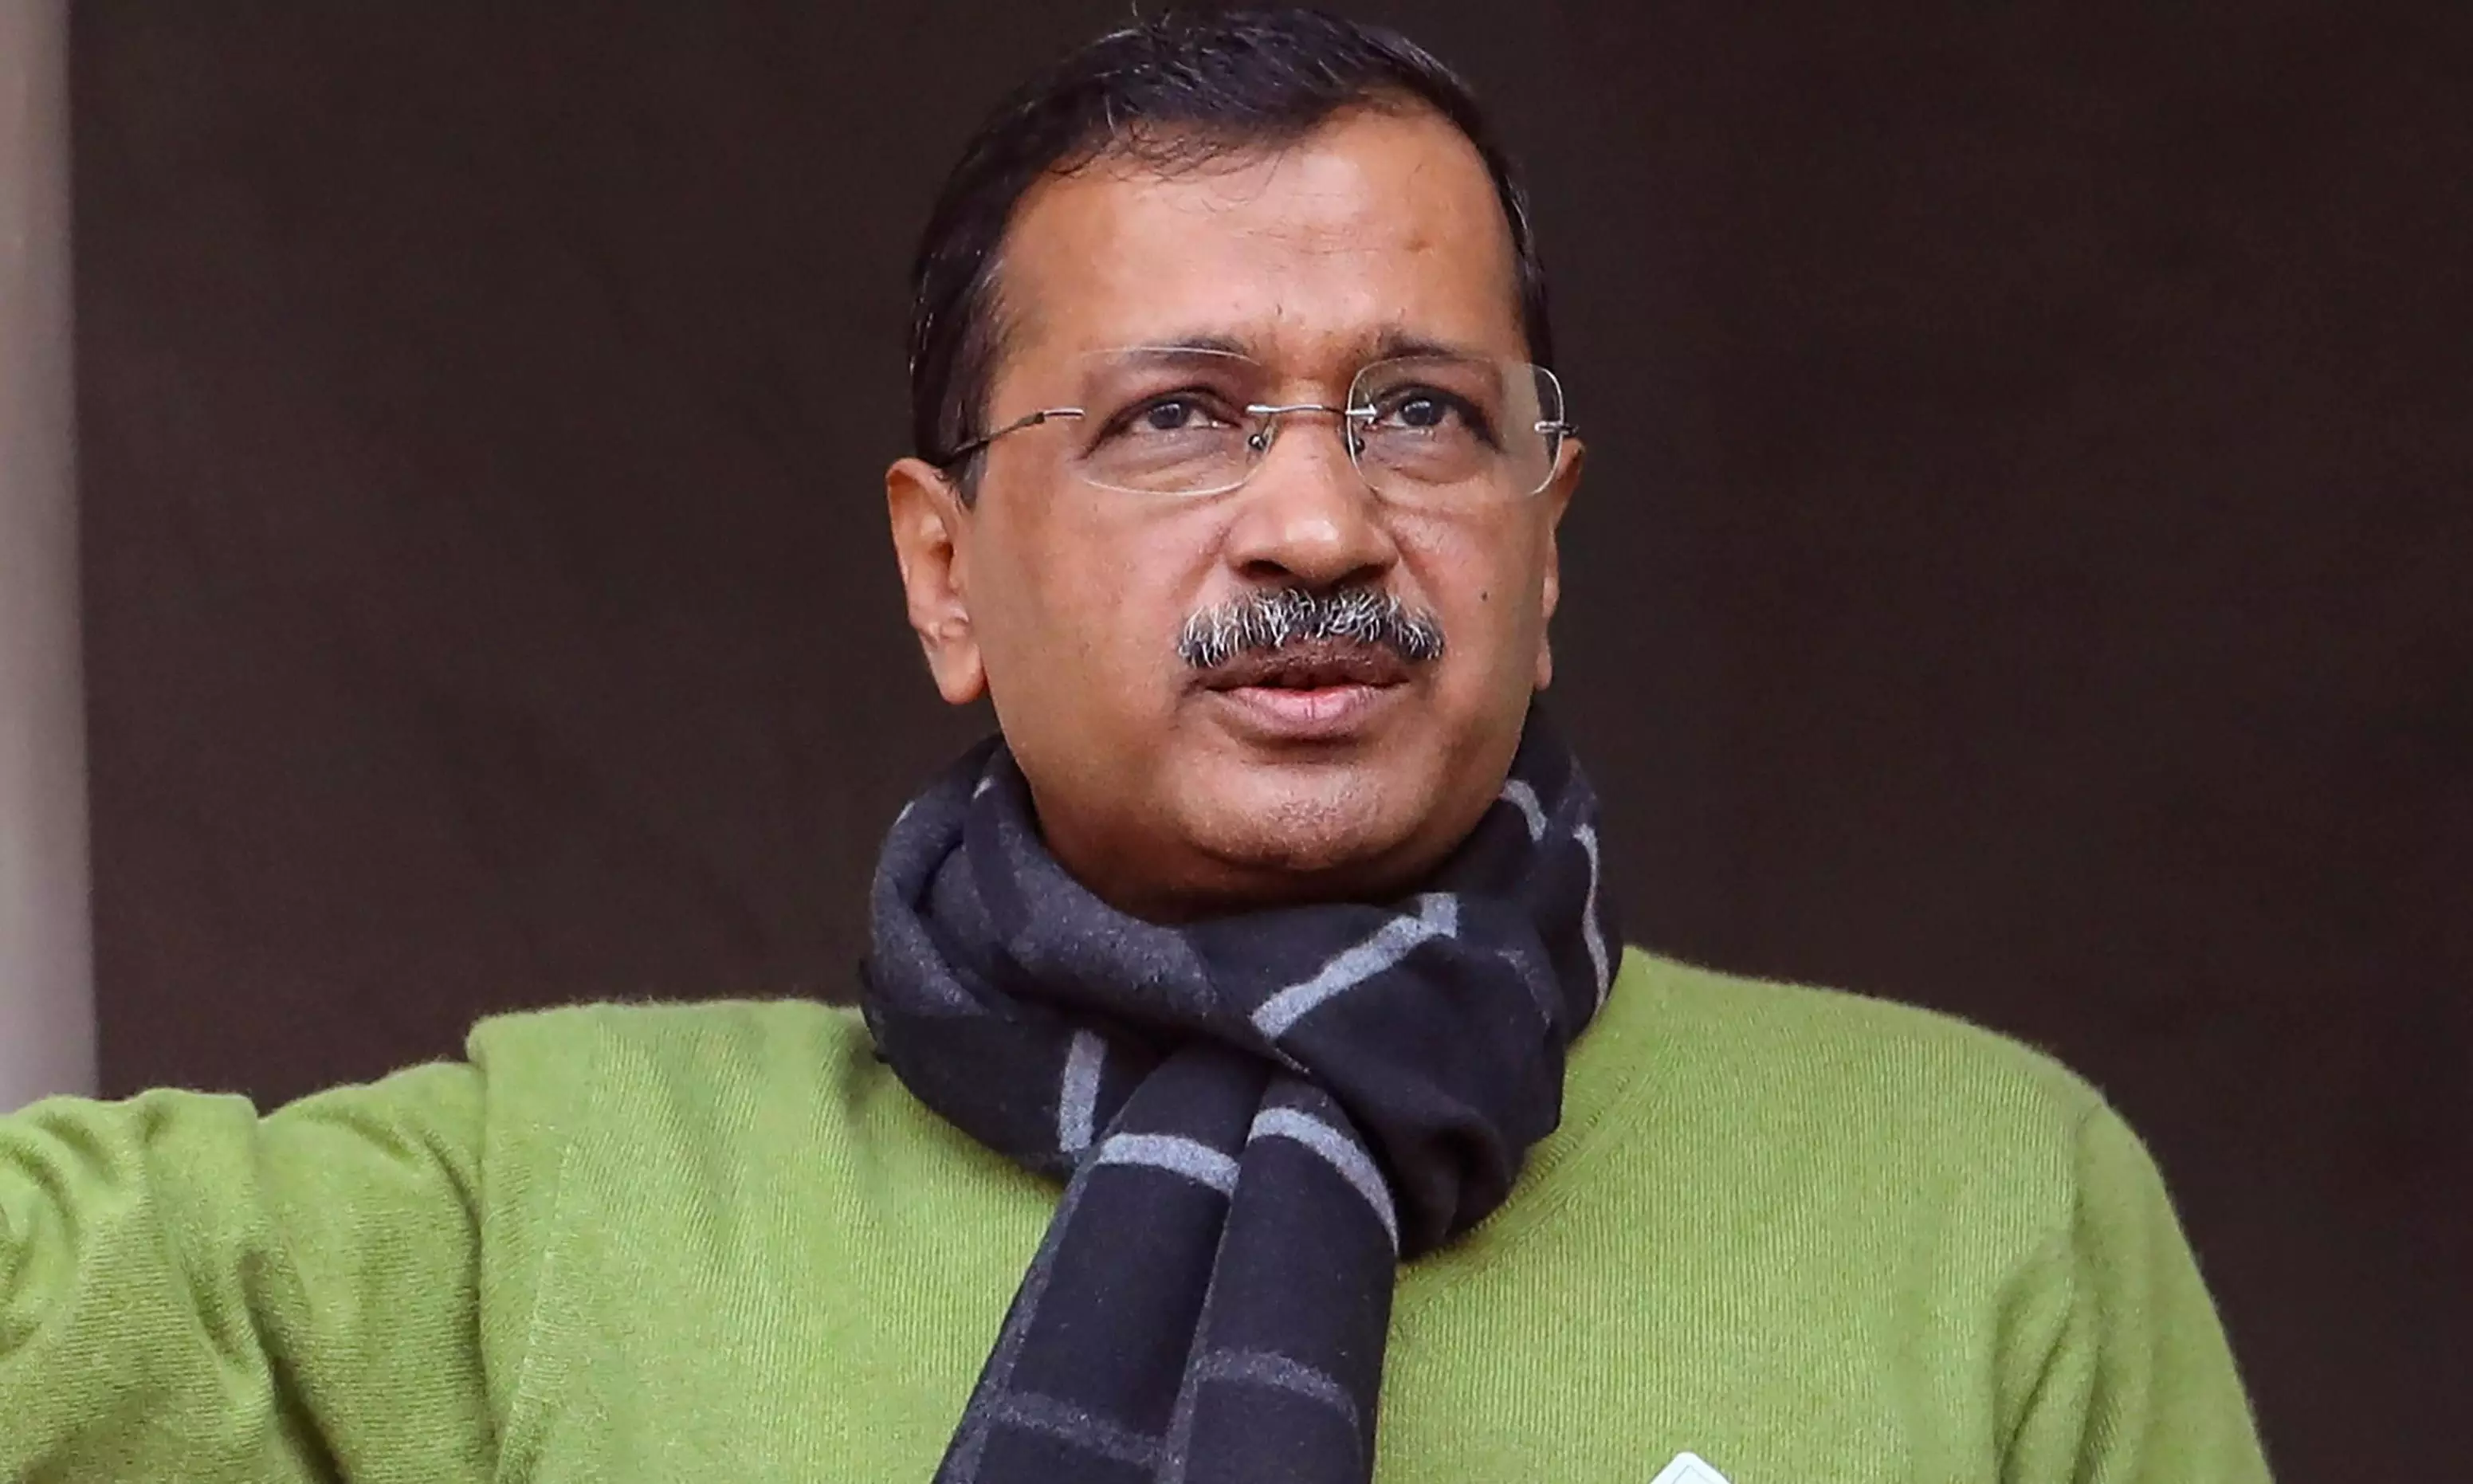 ‘Hope rights are protected’: UN hints at Kejriwal’s arrest, freezing of Cong accounts